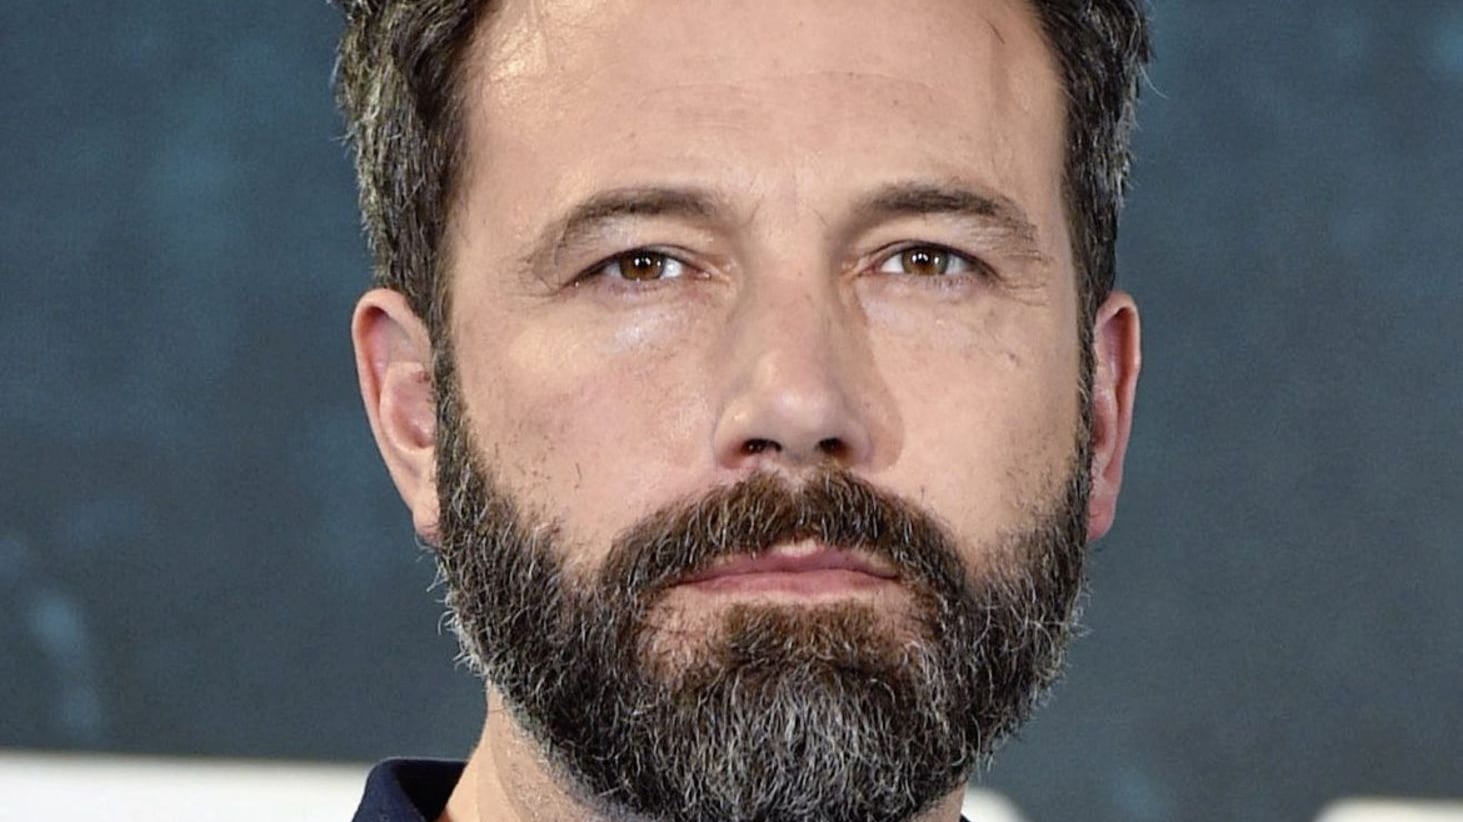 Ben Affleck is in a celebrity nerd-game group. Picture by Matt Crossick/PA